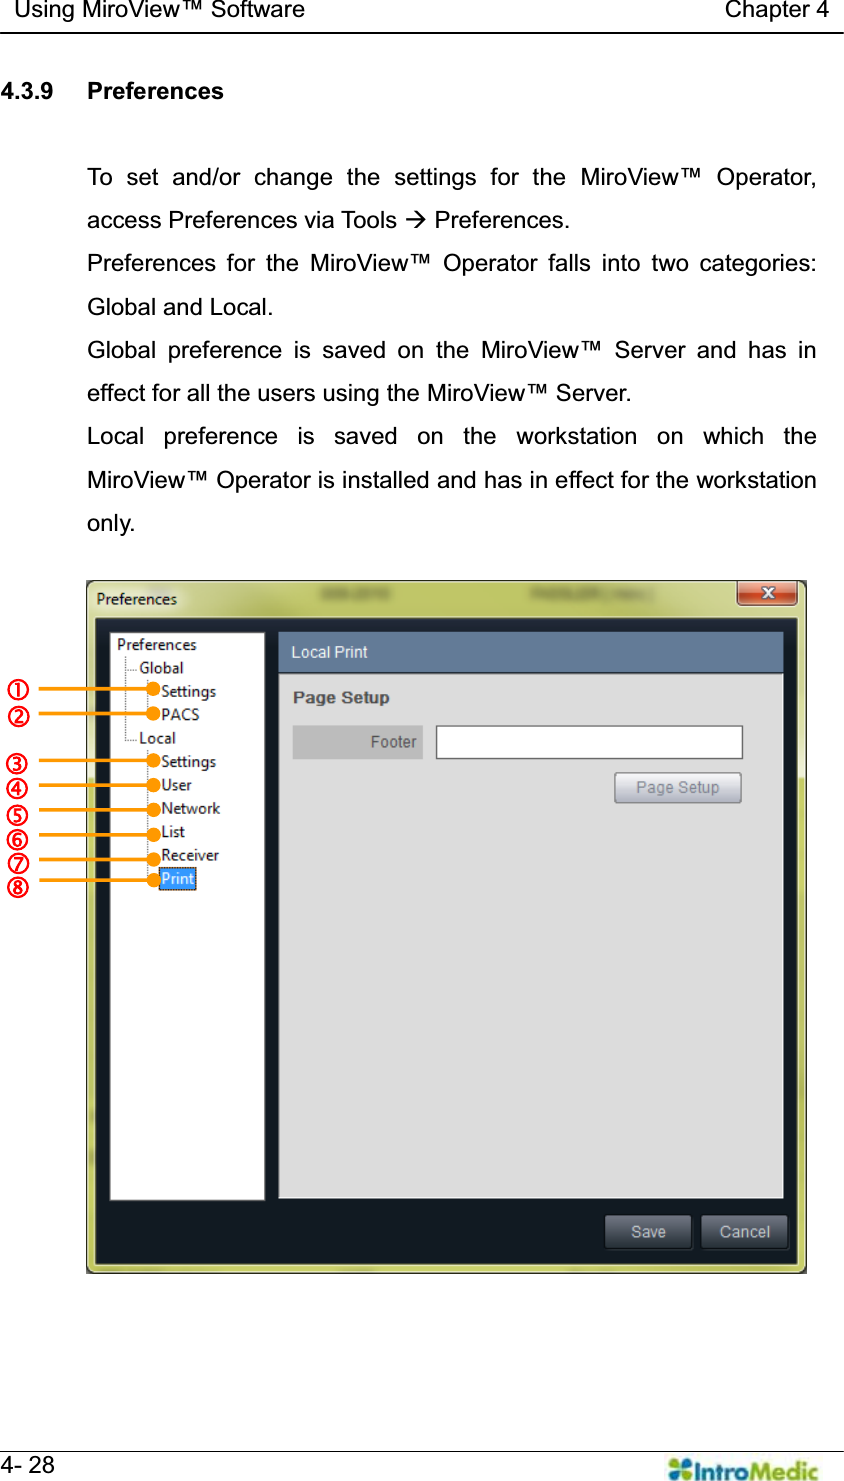   Using MiroView Software                                   Chapter 4   4- 28 4.3.9 Preferences  To set and/or change the settings for the 0LUR9LHZ Operator, access Preferences via Tools Æ Preferences. Preferences for the 0LUR9LHZ Operator falls into two categories: Global and Local. Global preference is saved on the 0LUR9LHZ Server and has in effect for all the users using the 0LUR9LHZServer. Local preference is saved on the workstation on which the 0LUR9LHZOperator is installed and has in effect for the workstation only.   ic d e f ghj